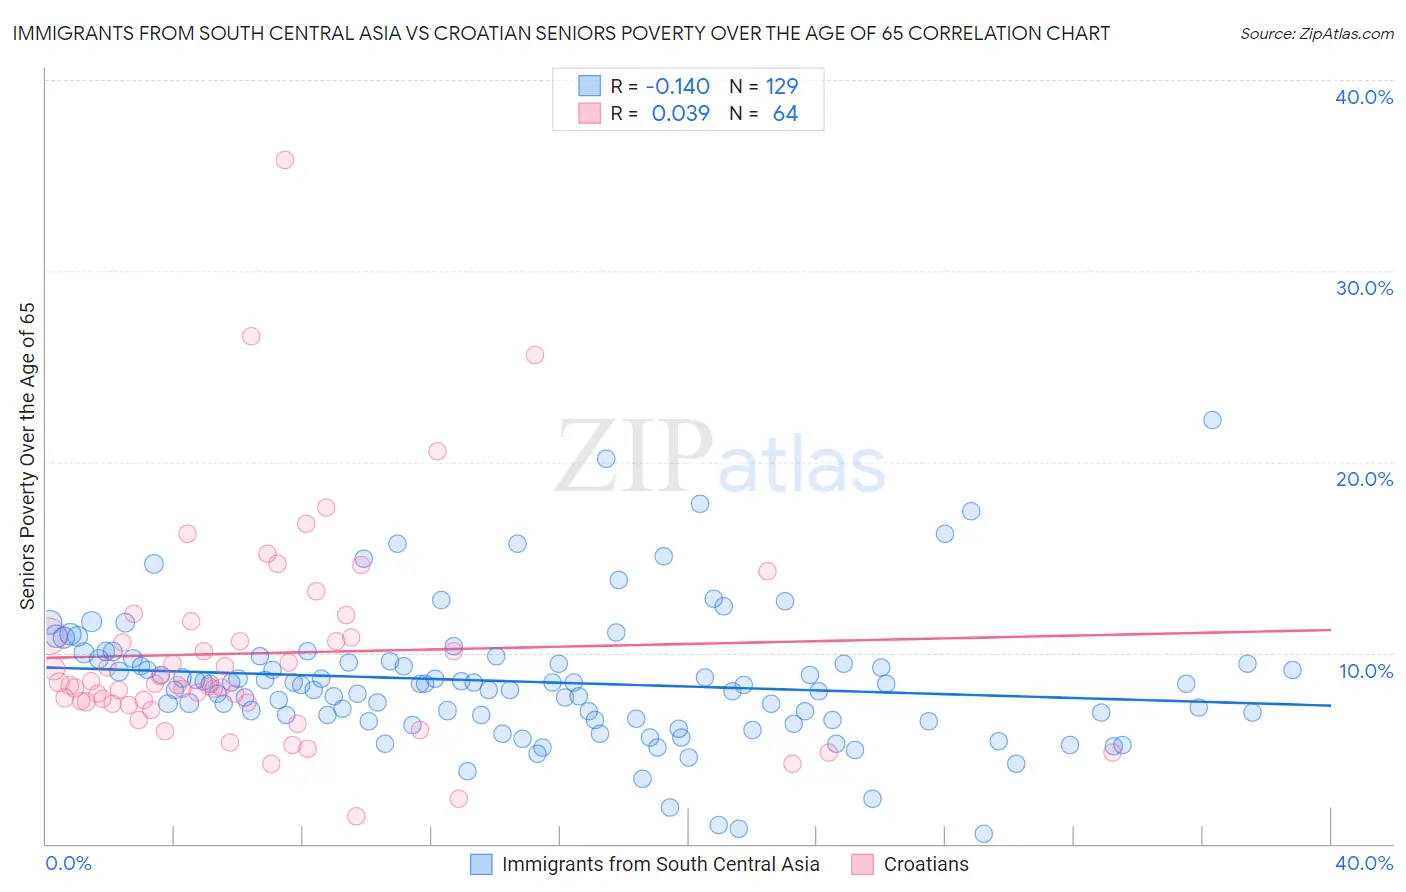 Immigrants from South Central Asia vs Croatian Seniors Poverty Over the Age of 65